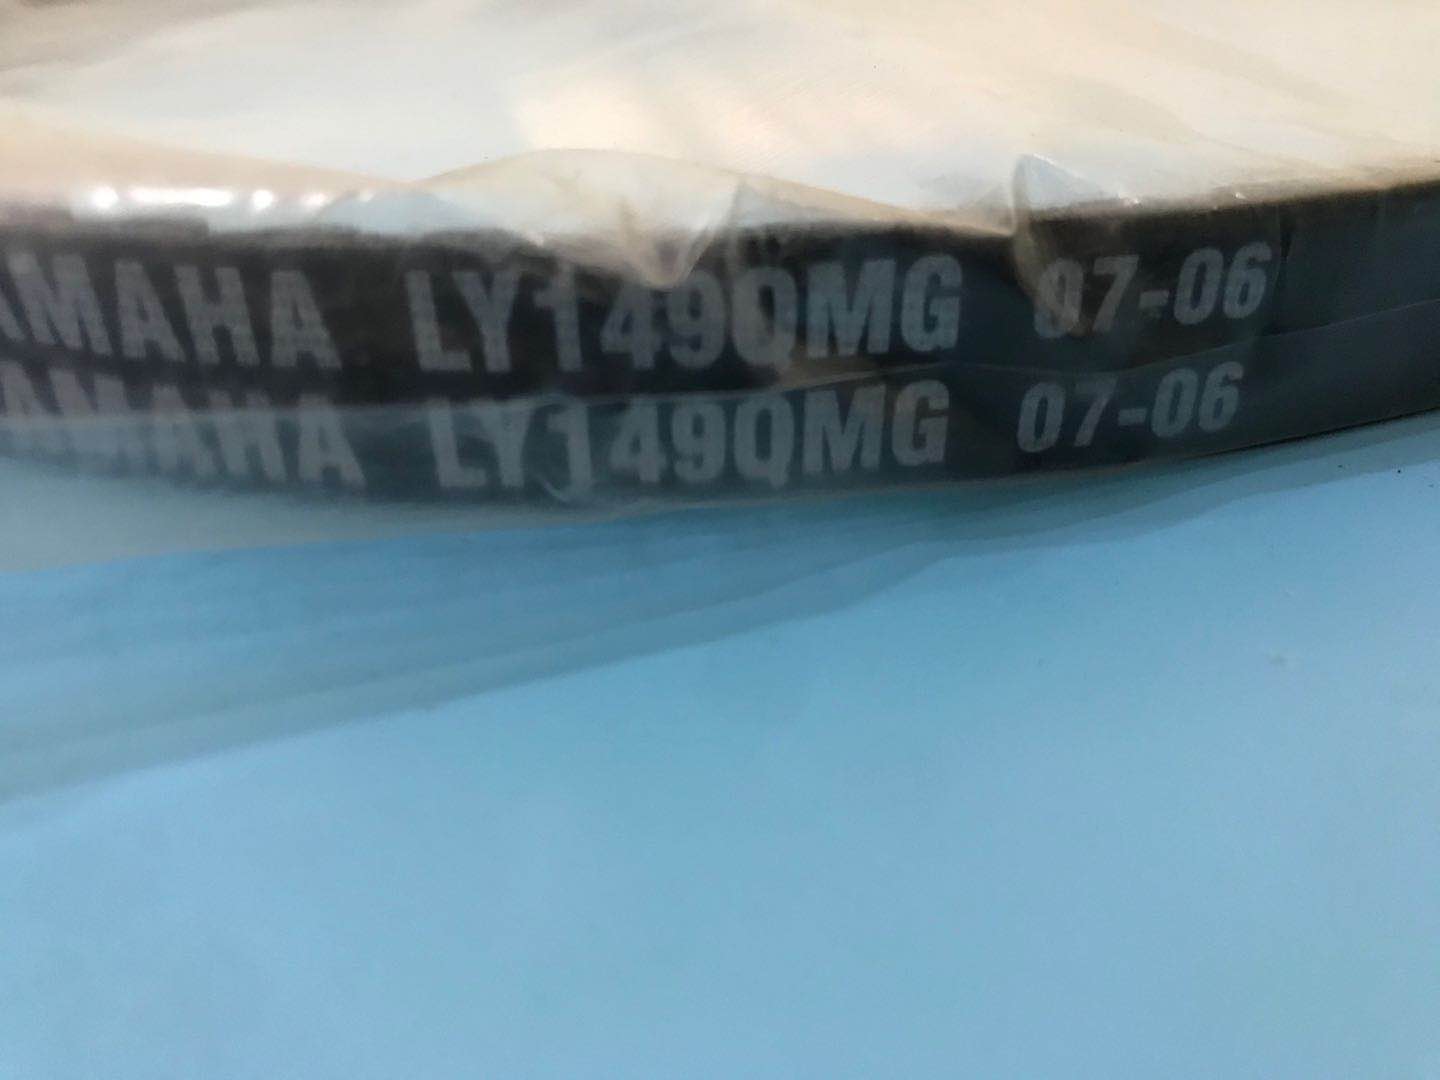 LY149QMB0706free shipping motorcycle Belt Split line Belt Lingdi Belt 125 Belt 150 Belt piaggio  Belt lover skin